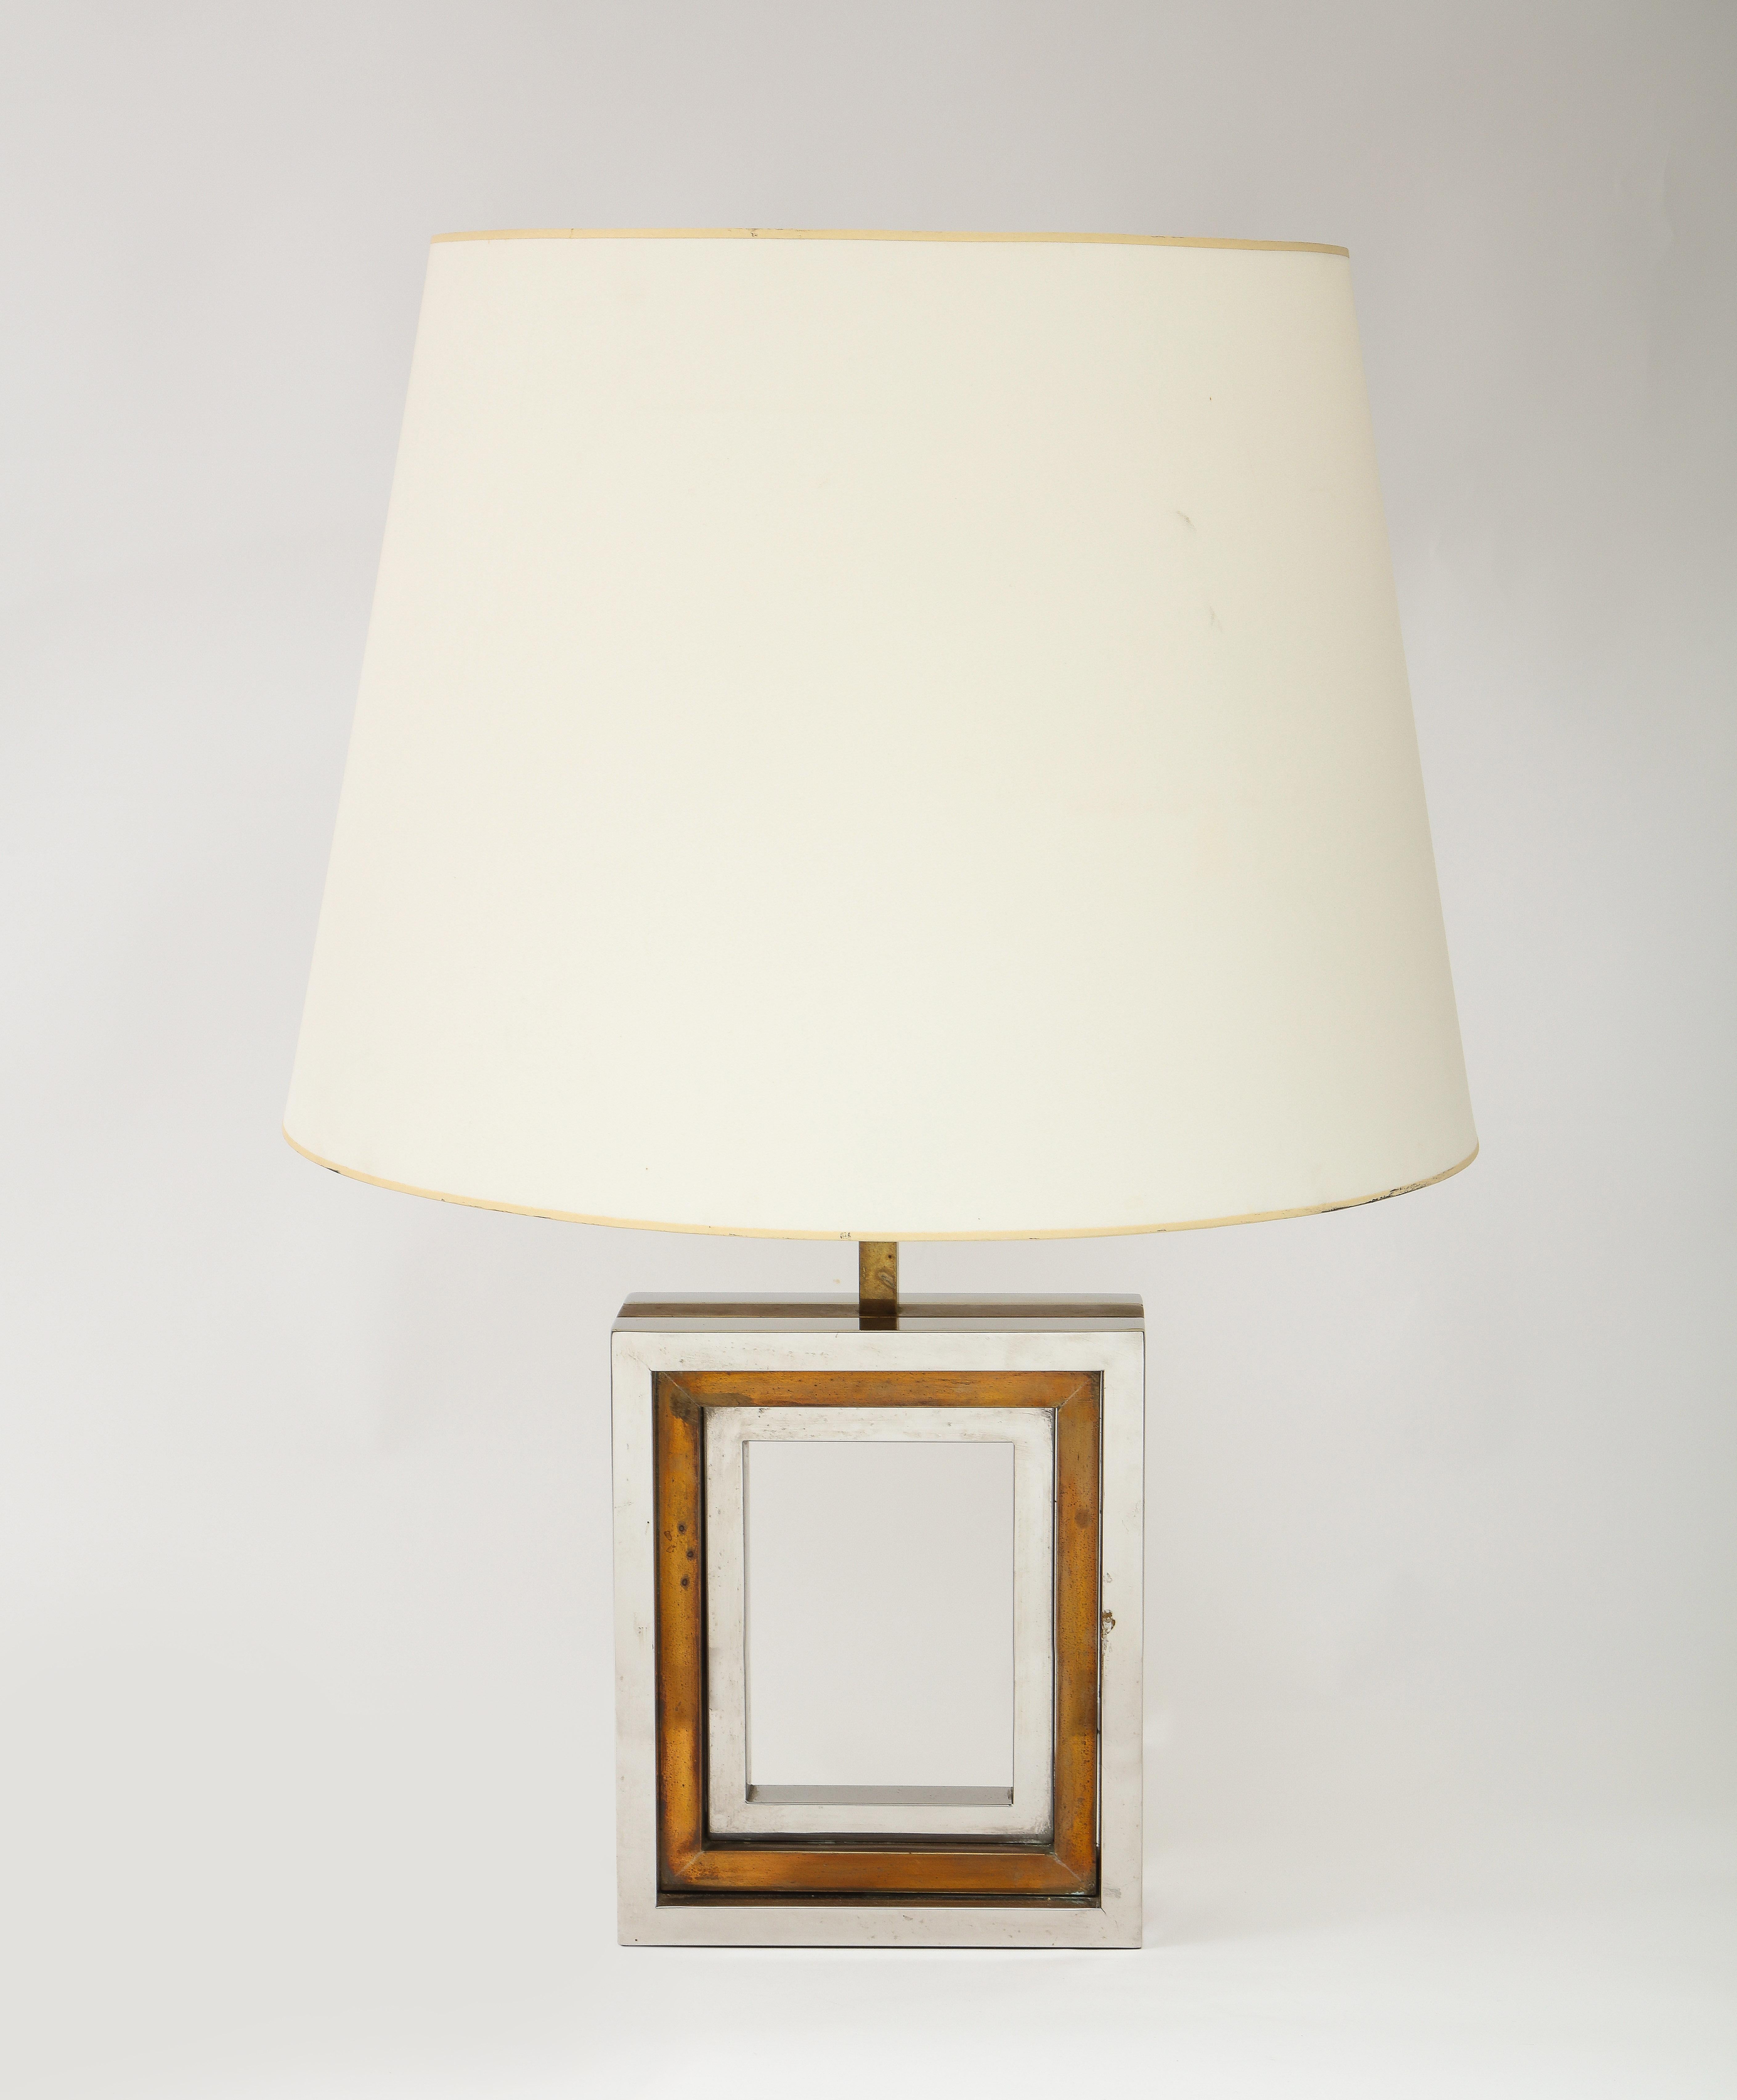 Large two-tone lamp by Romeo Rega. The base only 10x4x20. Shade is for photographic purposes but one can be provided on request.